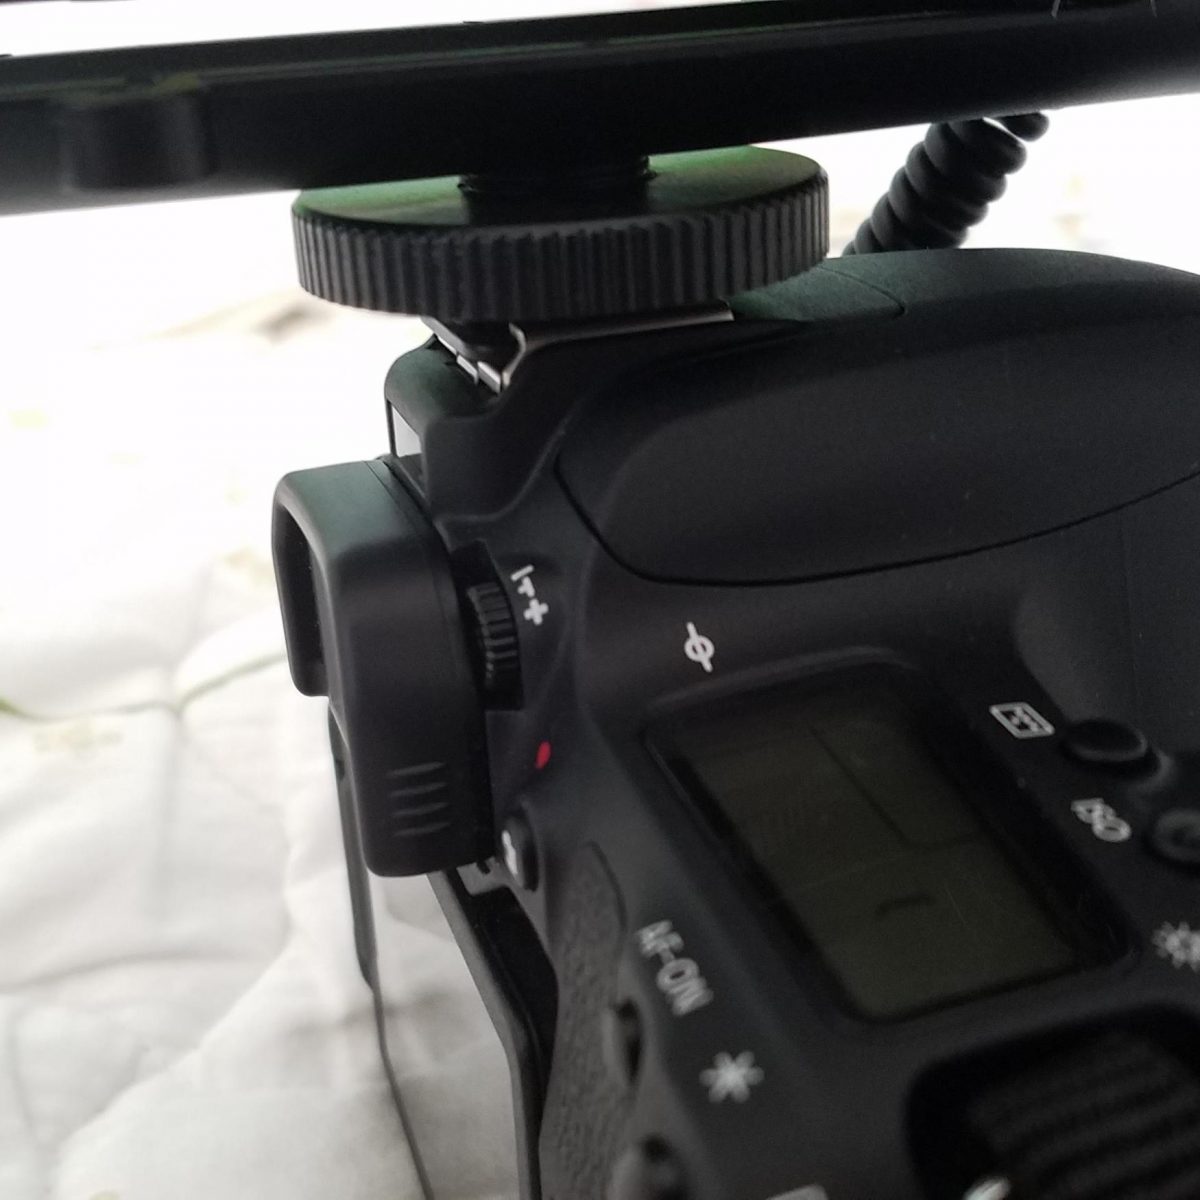 unsticking-a-monopod-shoe-from-your-camera-a-quick-tutorial